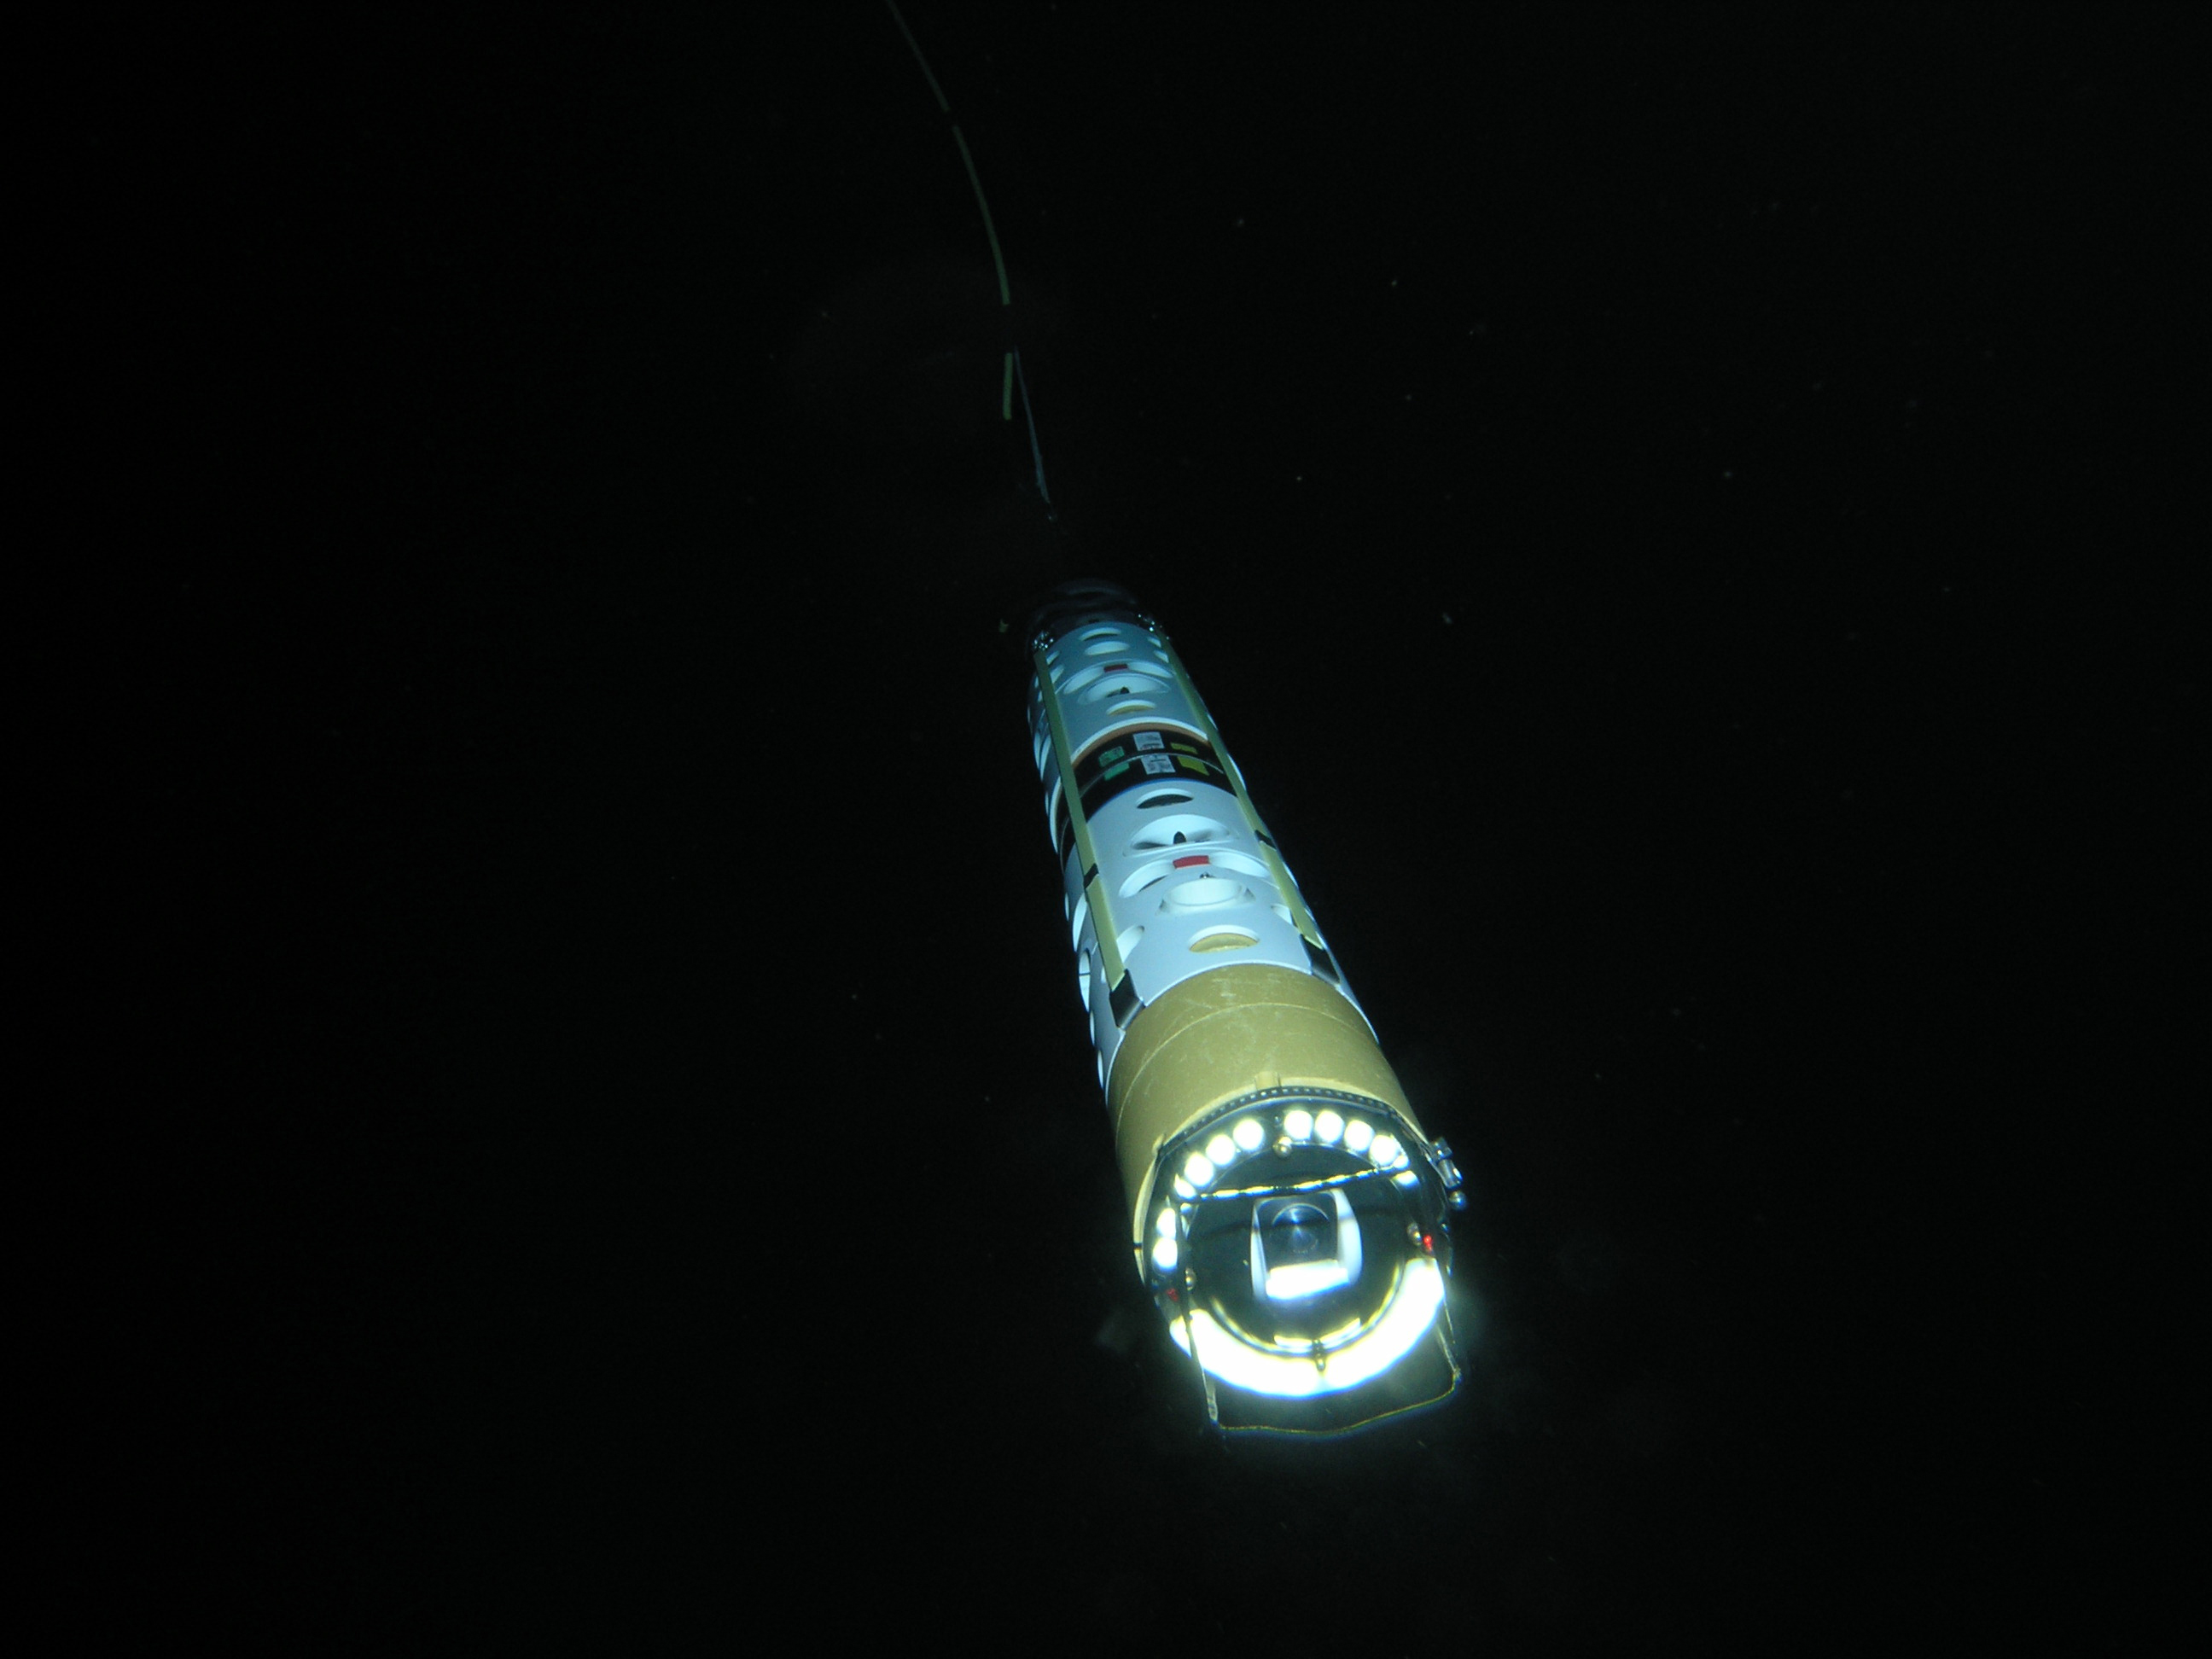 A long tube floats in the water.